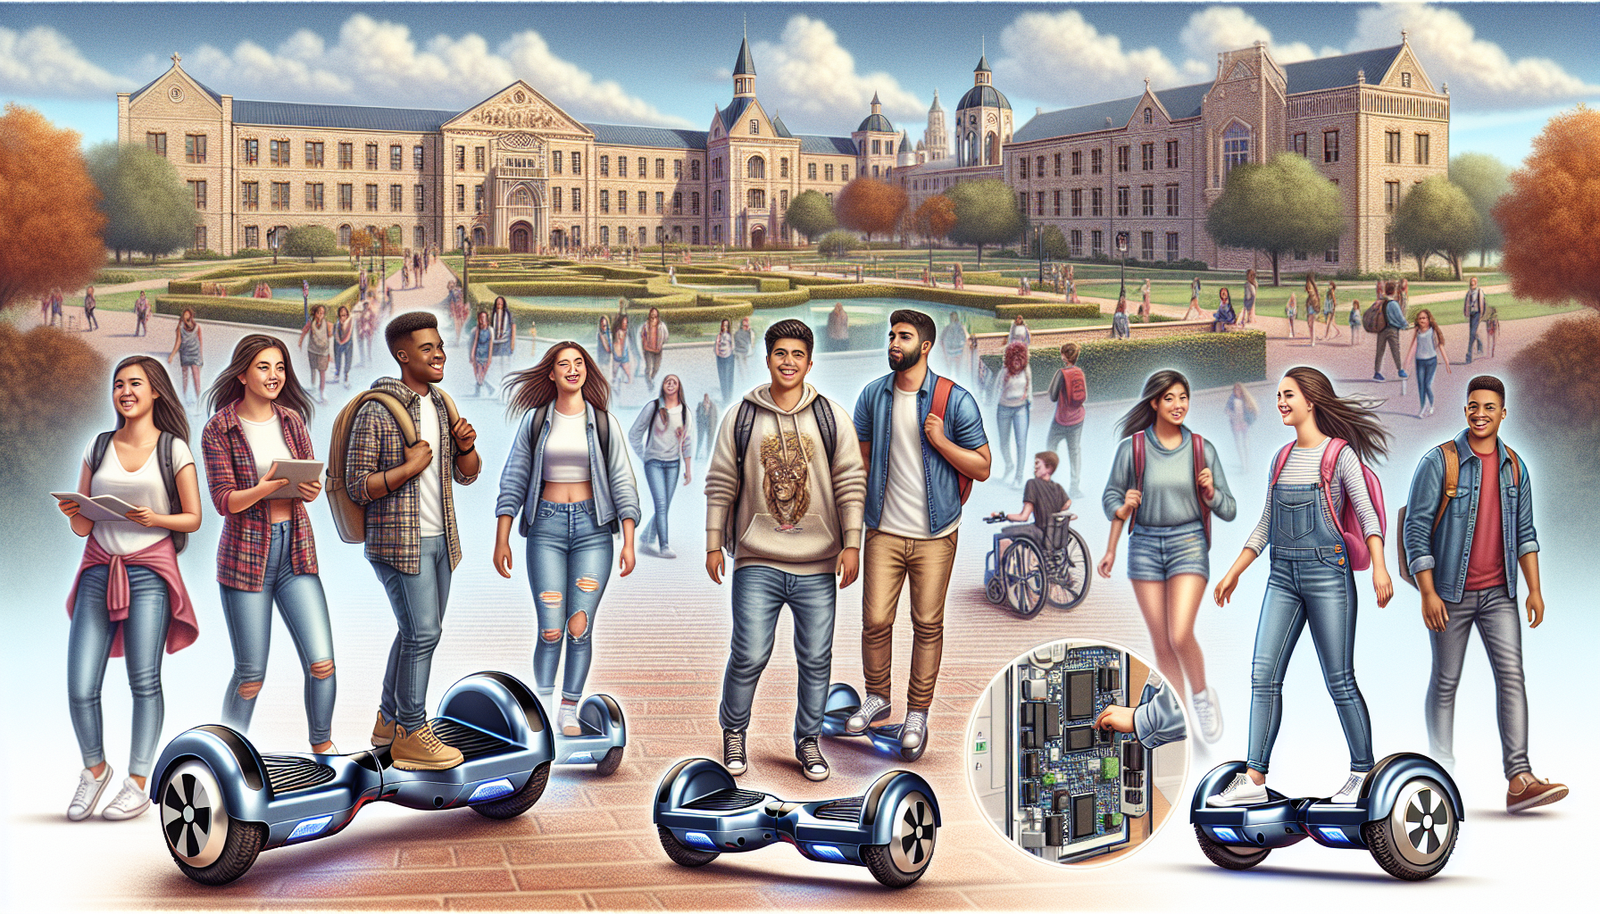 Are Hoverboards Allowed On College Campuses?